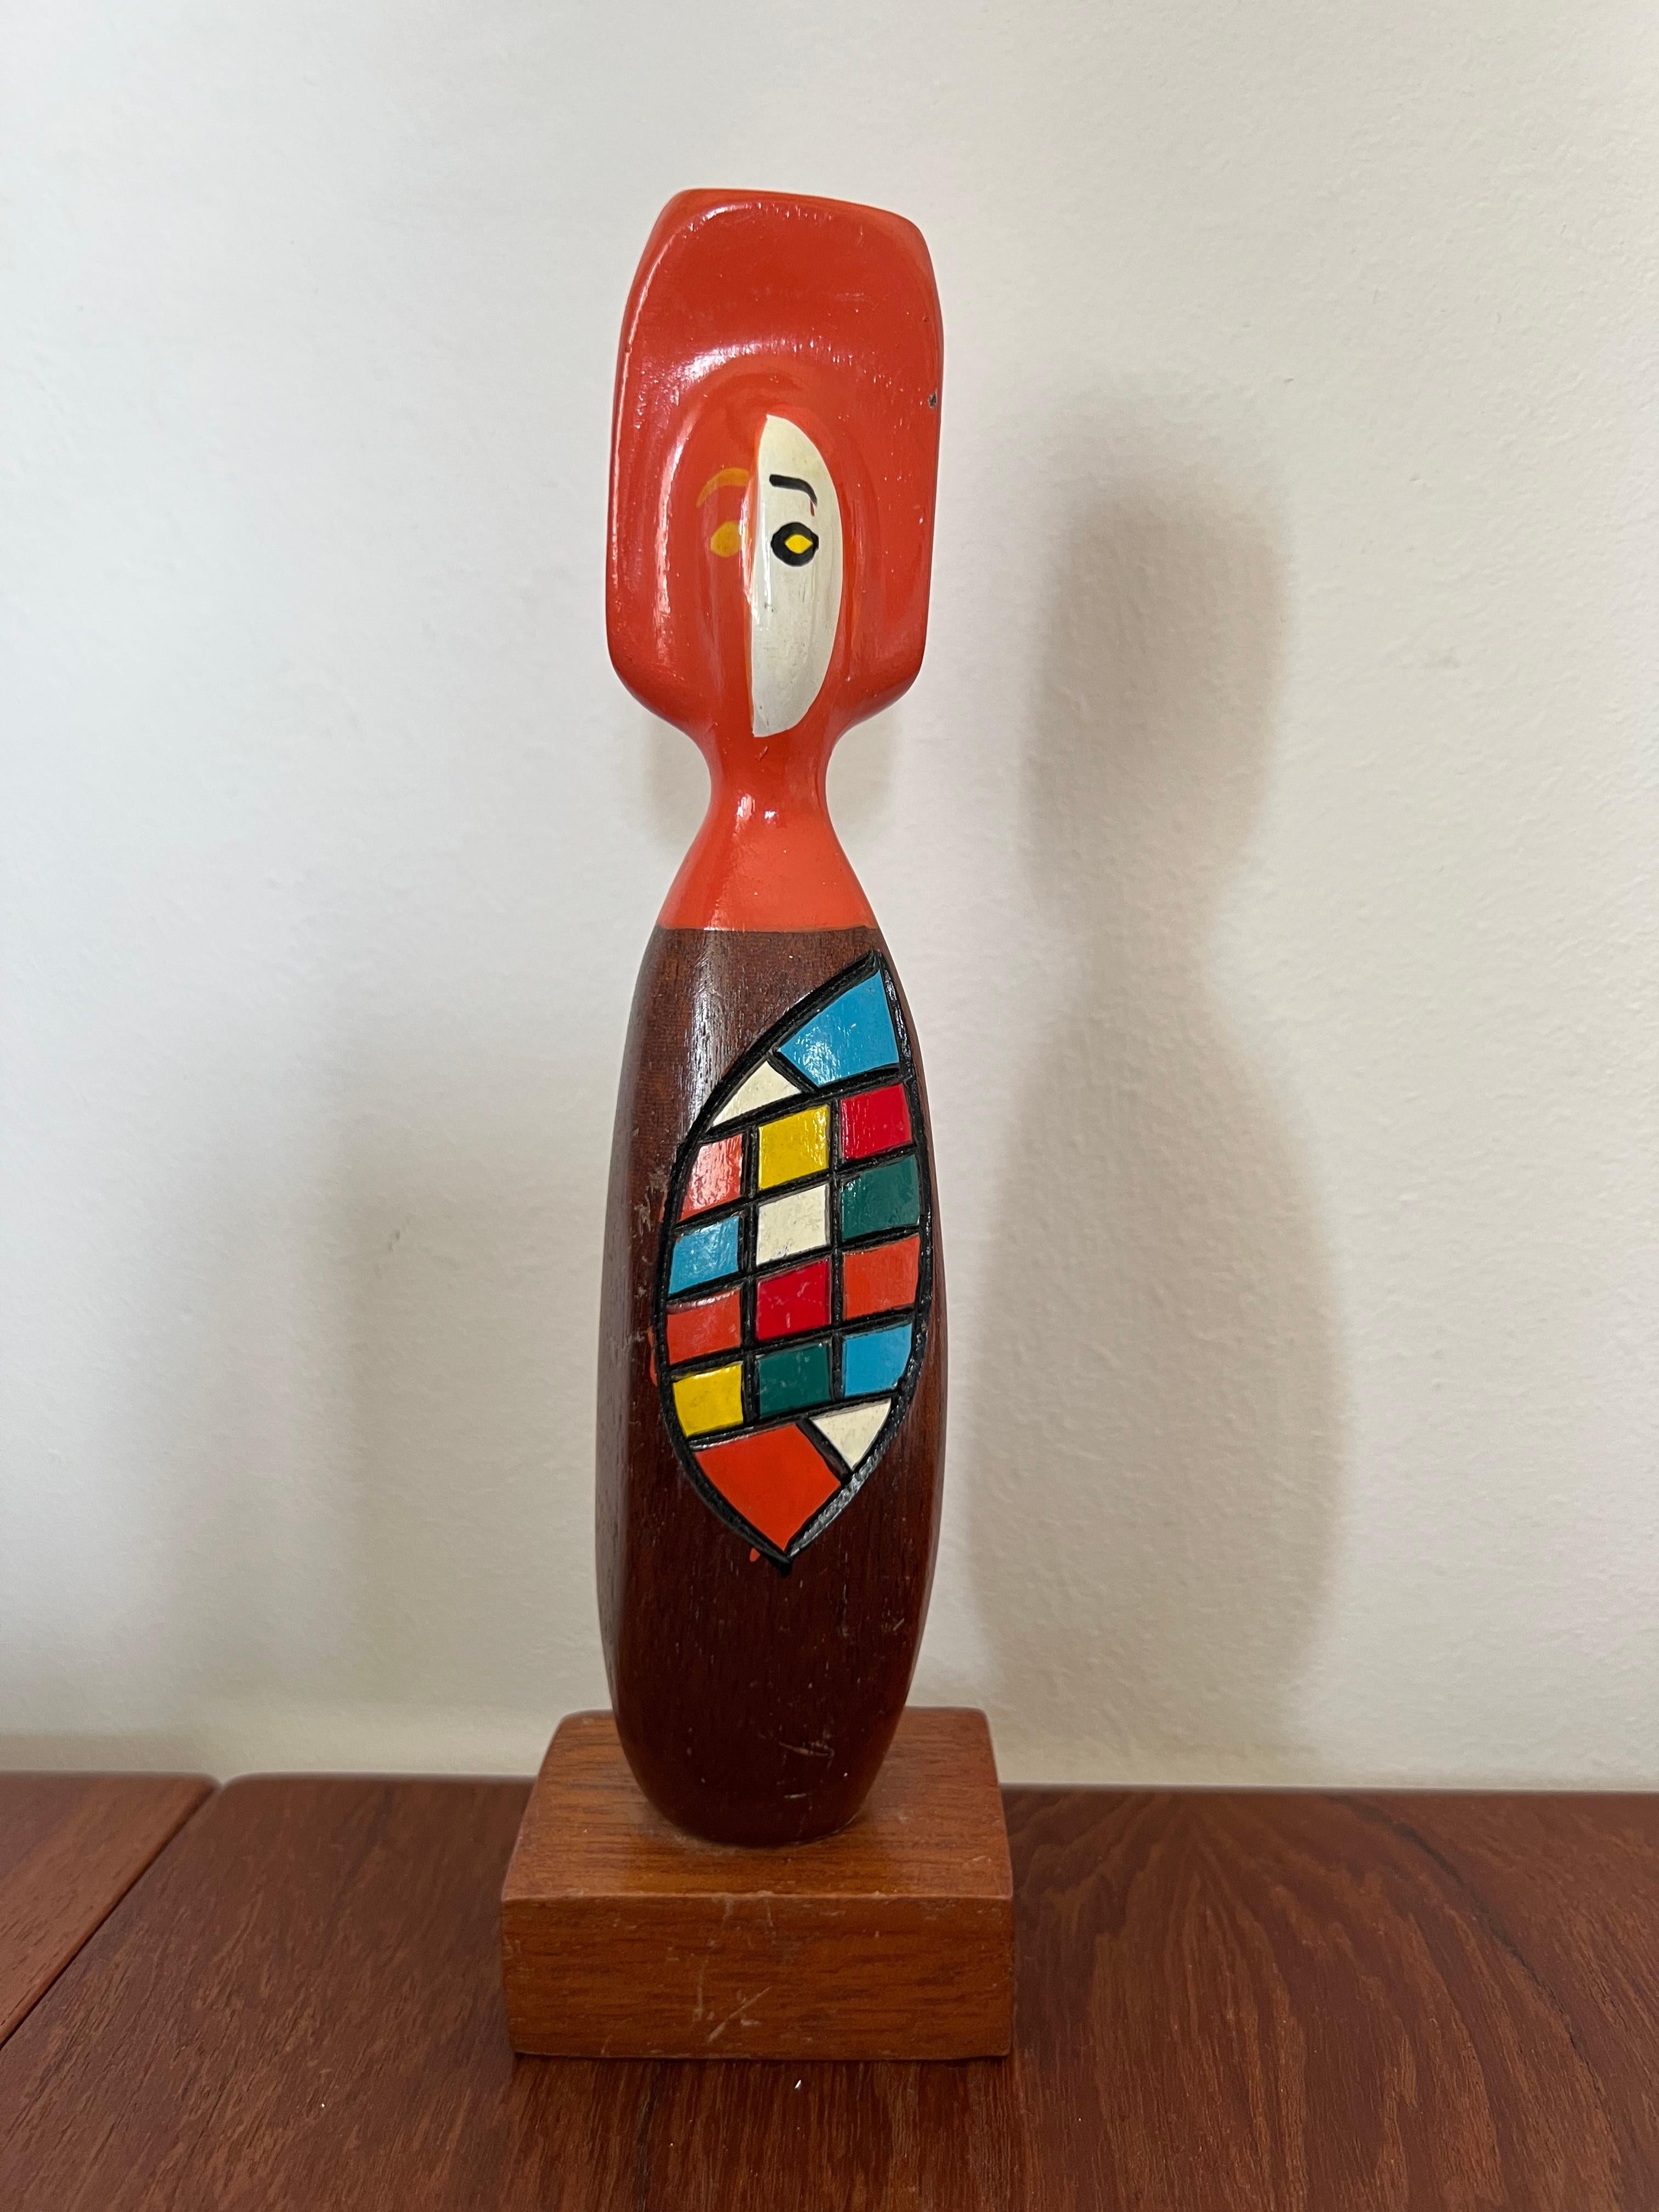 Figural abstract object deco figure Mid-Century Modern.
Great object is painted in a beautiful color combination. Created from teak wood with many details. It stands on a small pedestal. The figure has something very graceful. Inspired by the